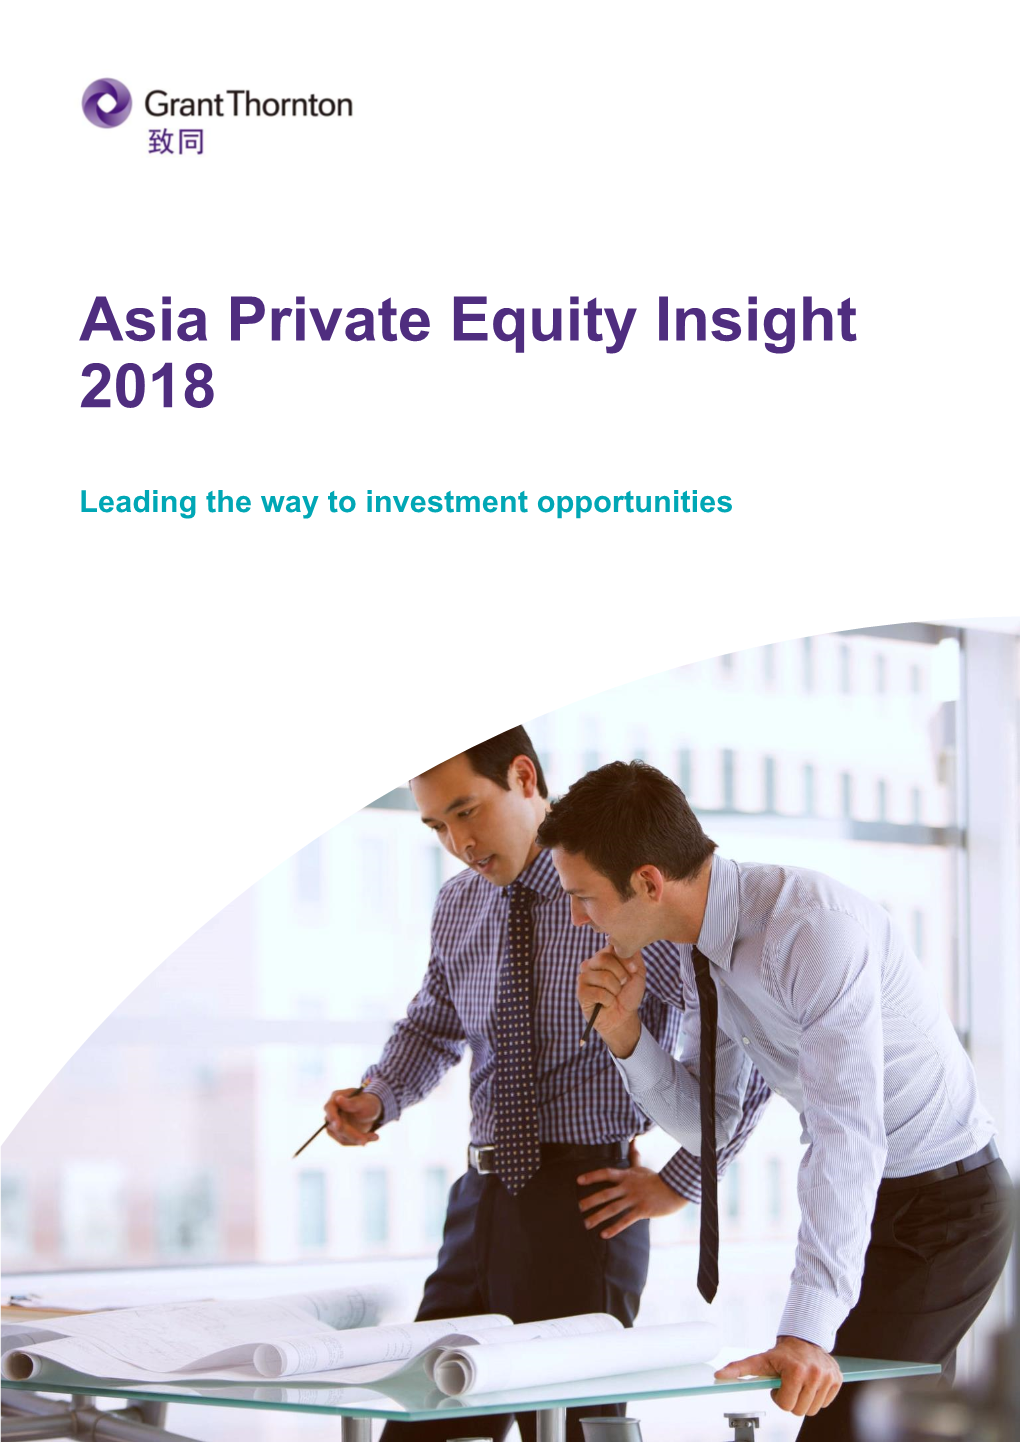 Asia Private Equity Insight 2018